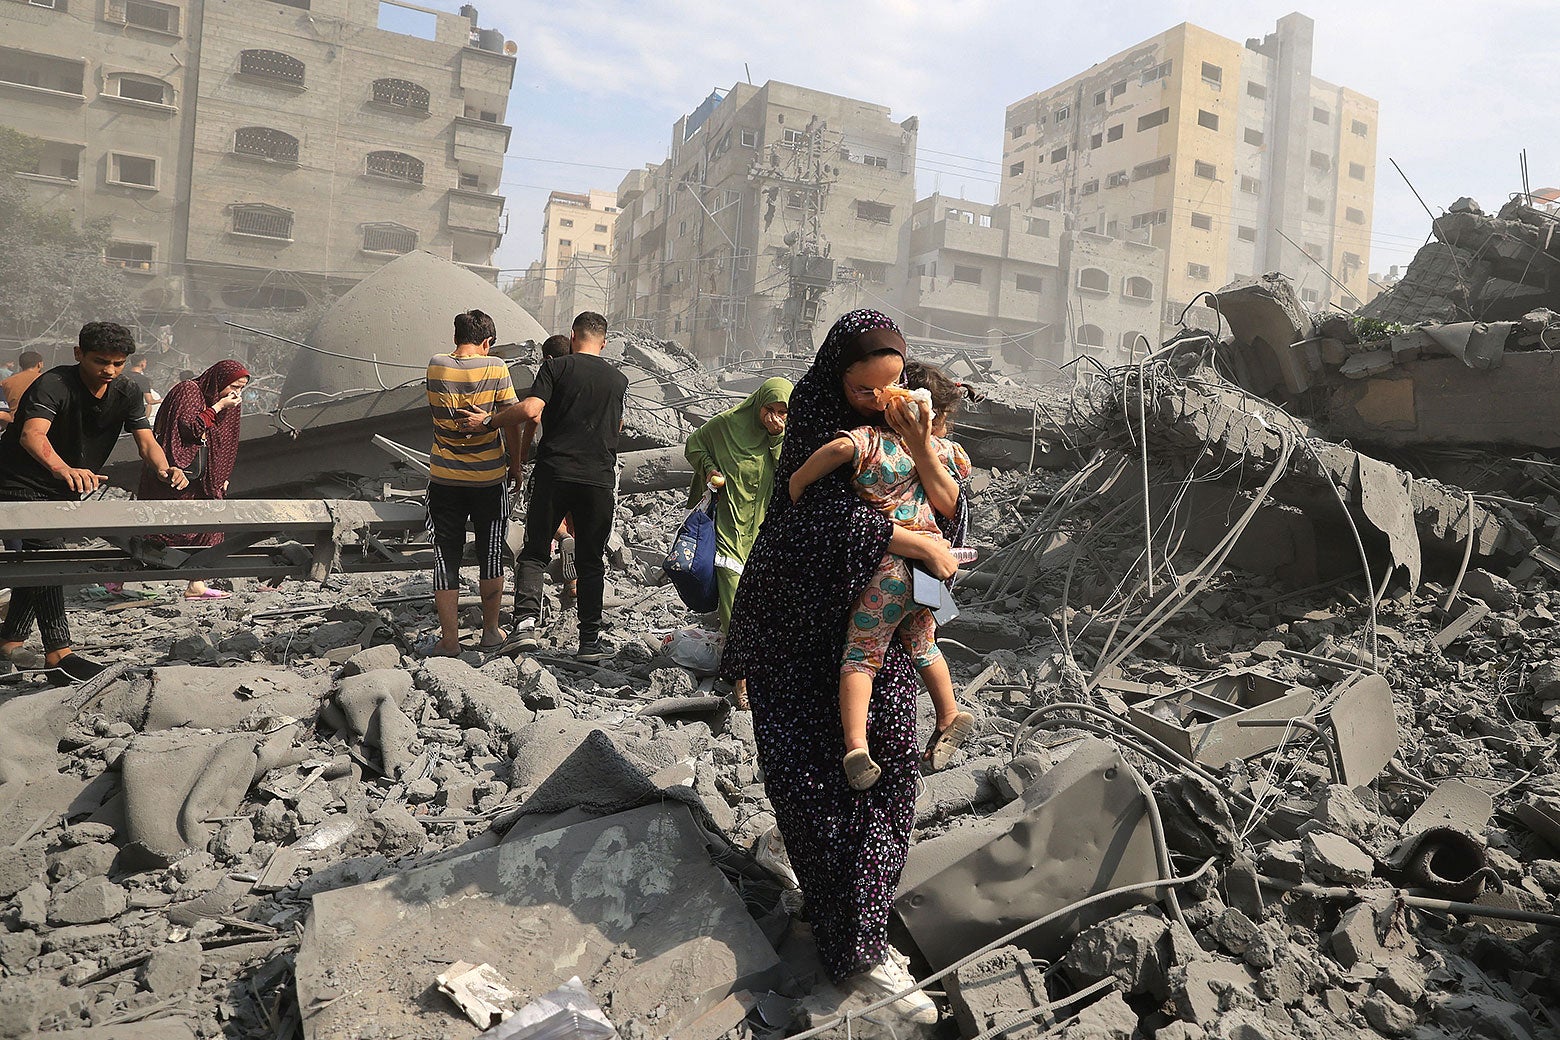 A woman holding a child walks over rubble from a concrete building. Several people are climbing over the rubble in the background.